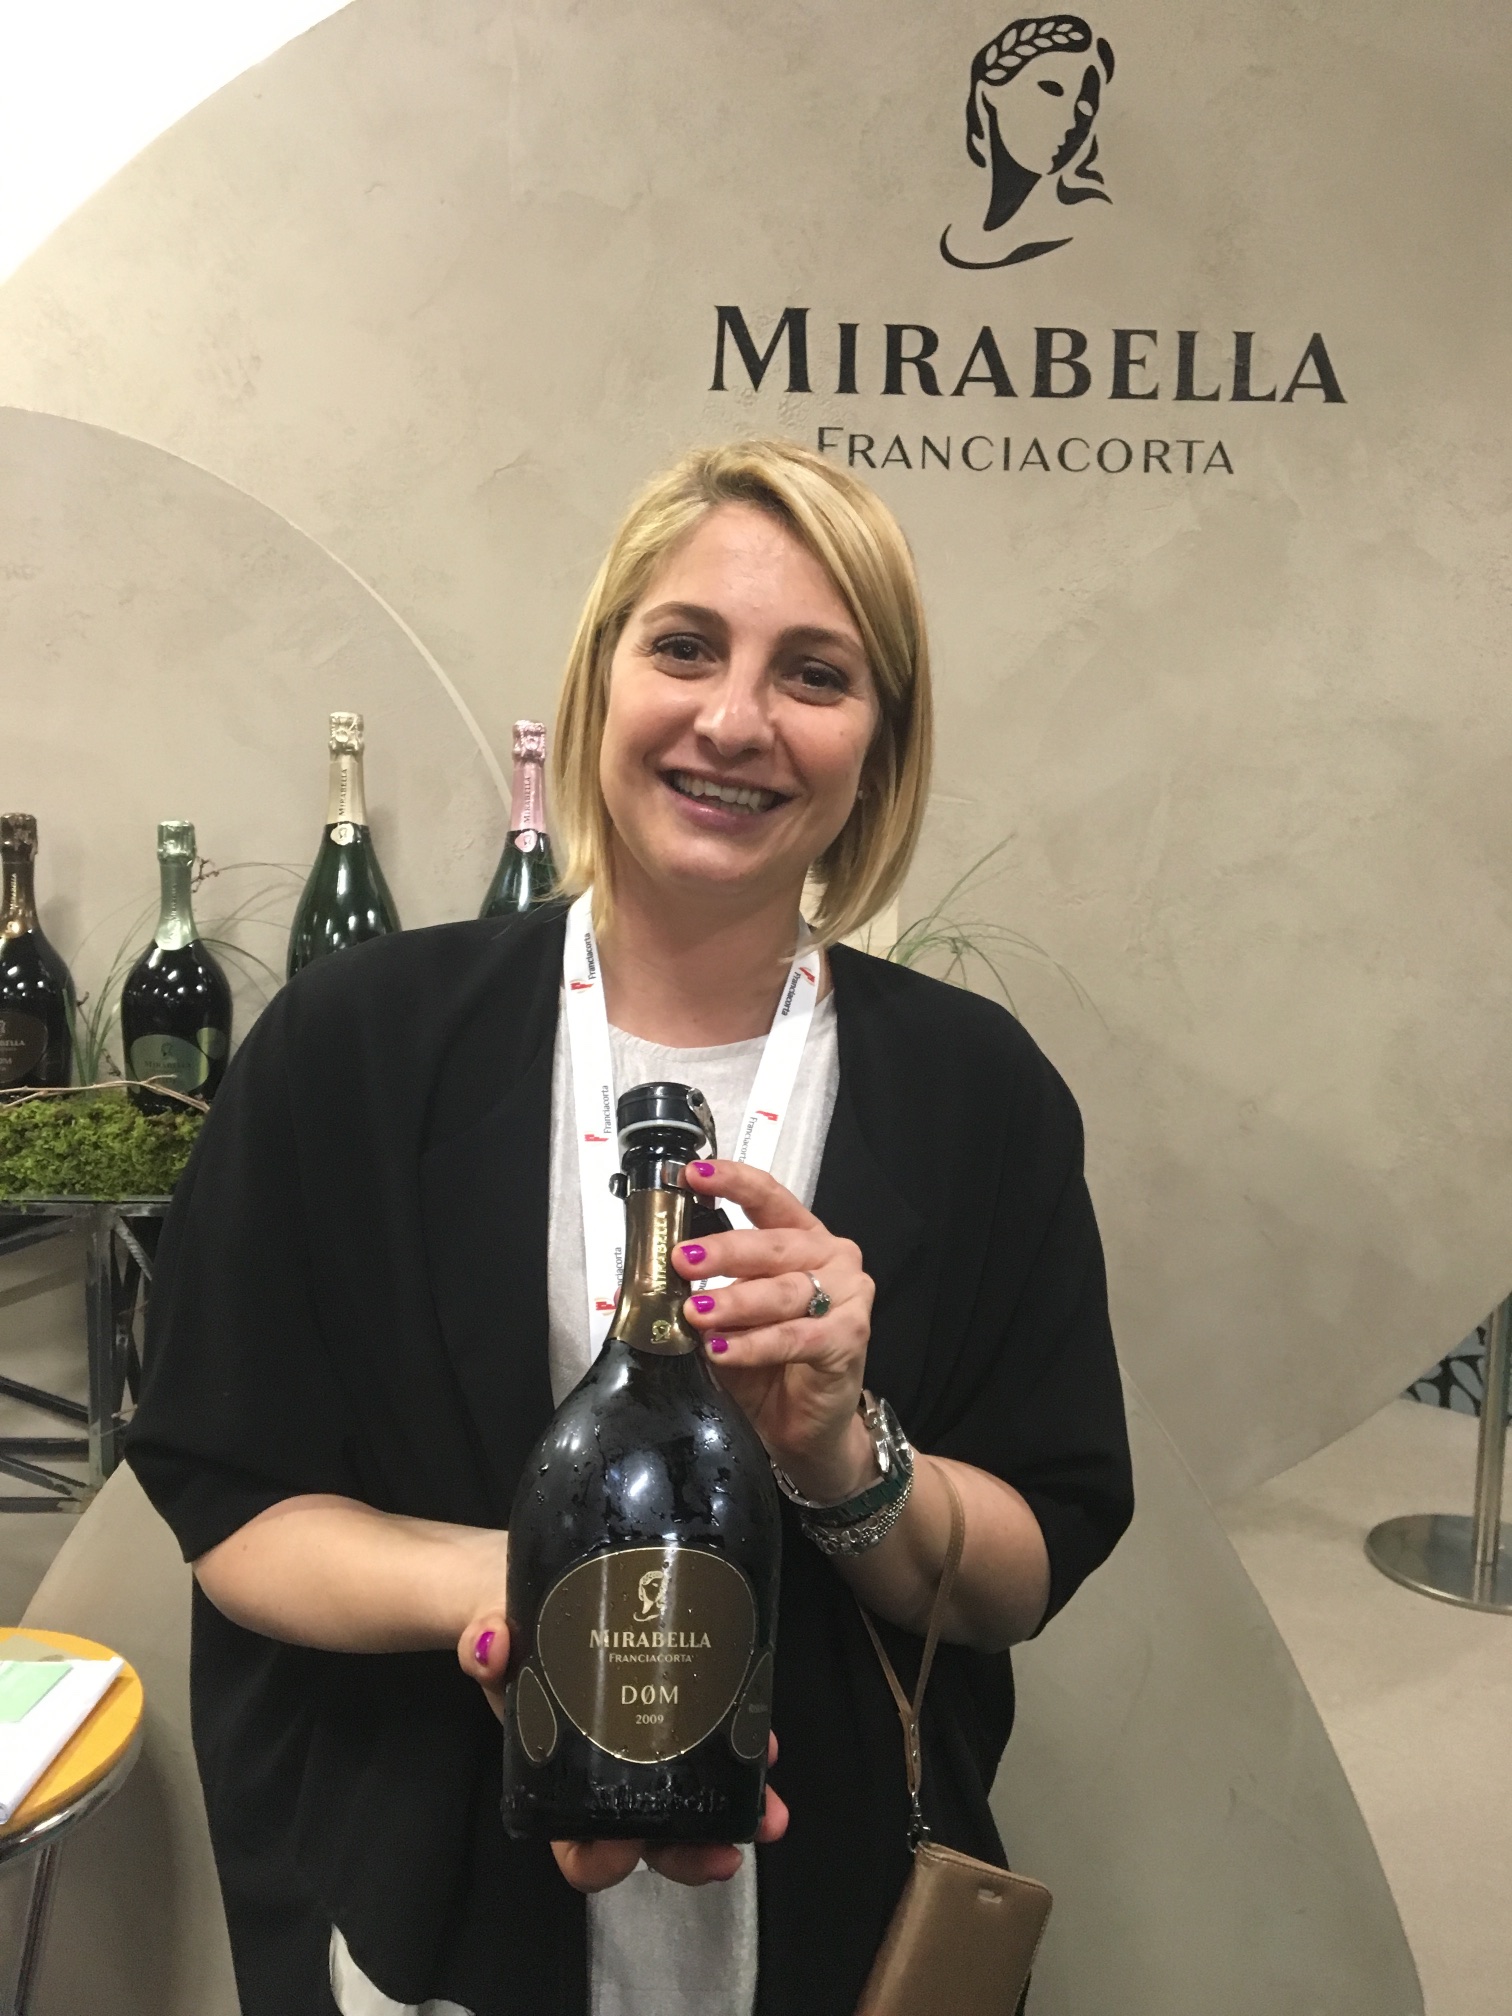 Our new best friend. And Marta Poli, the export manager at Mirabella winery.